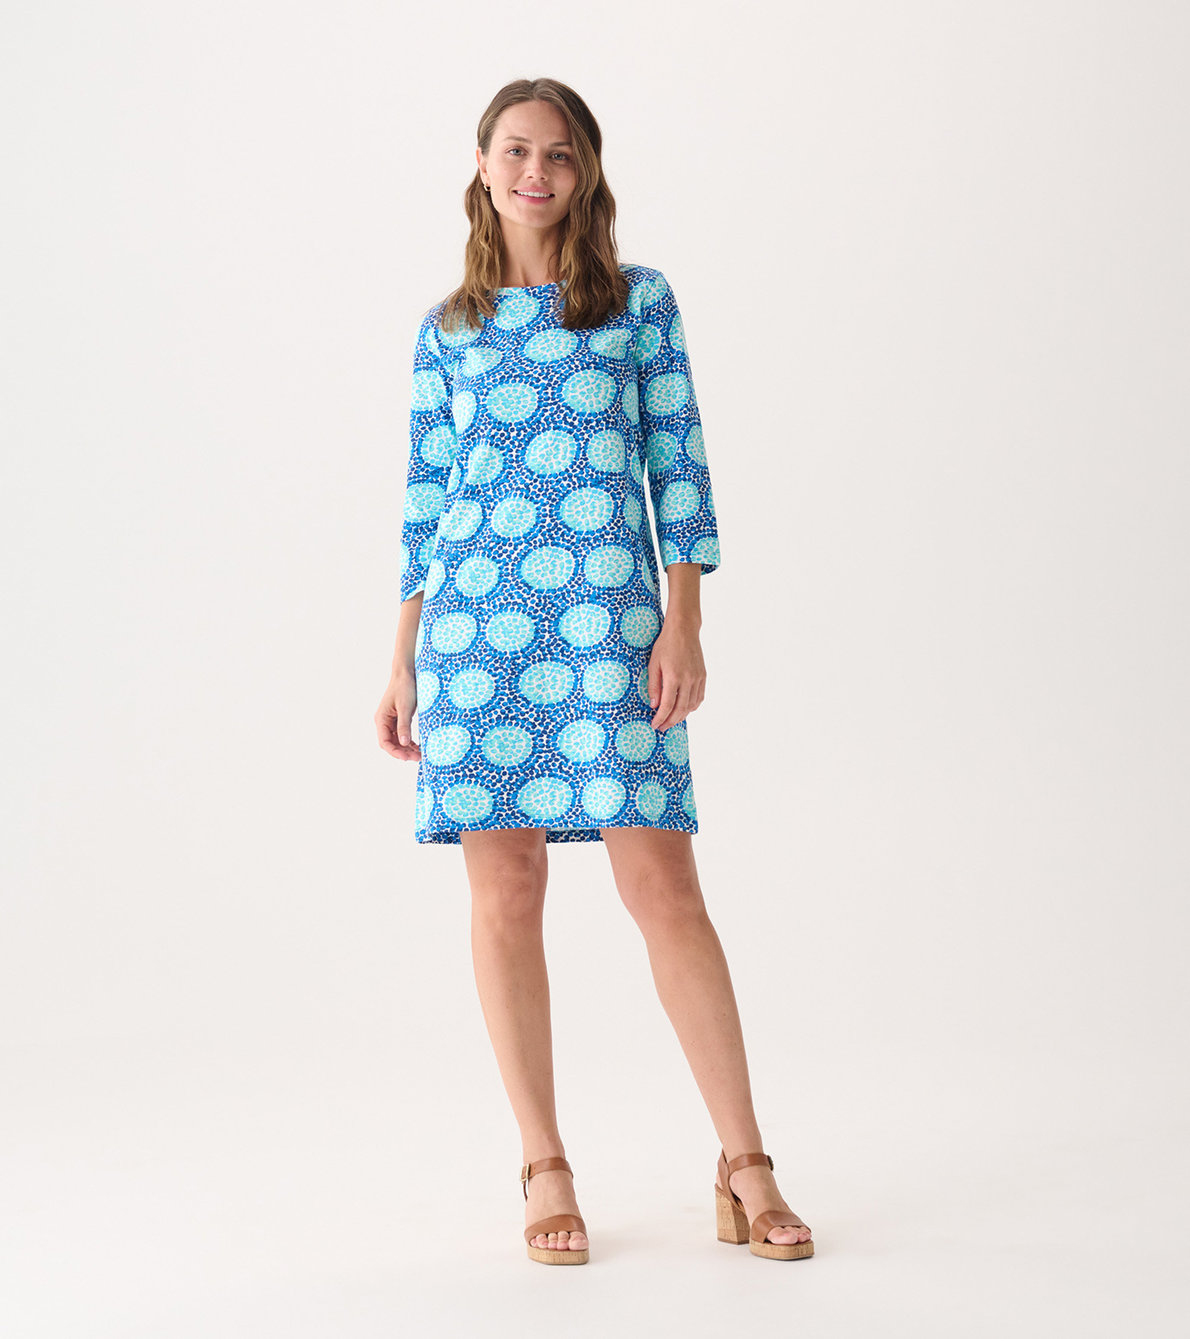 View larger image of Women's Cobblestone Path 3/4 Sleeve Summer Dress